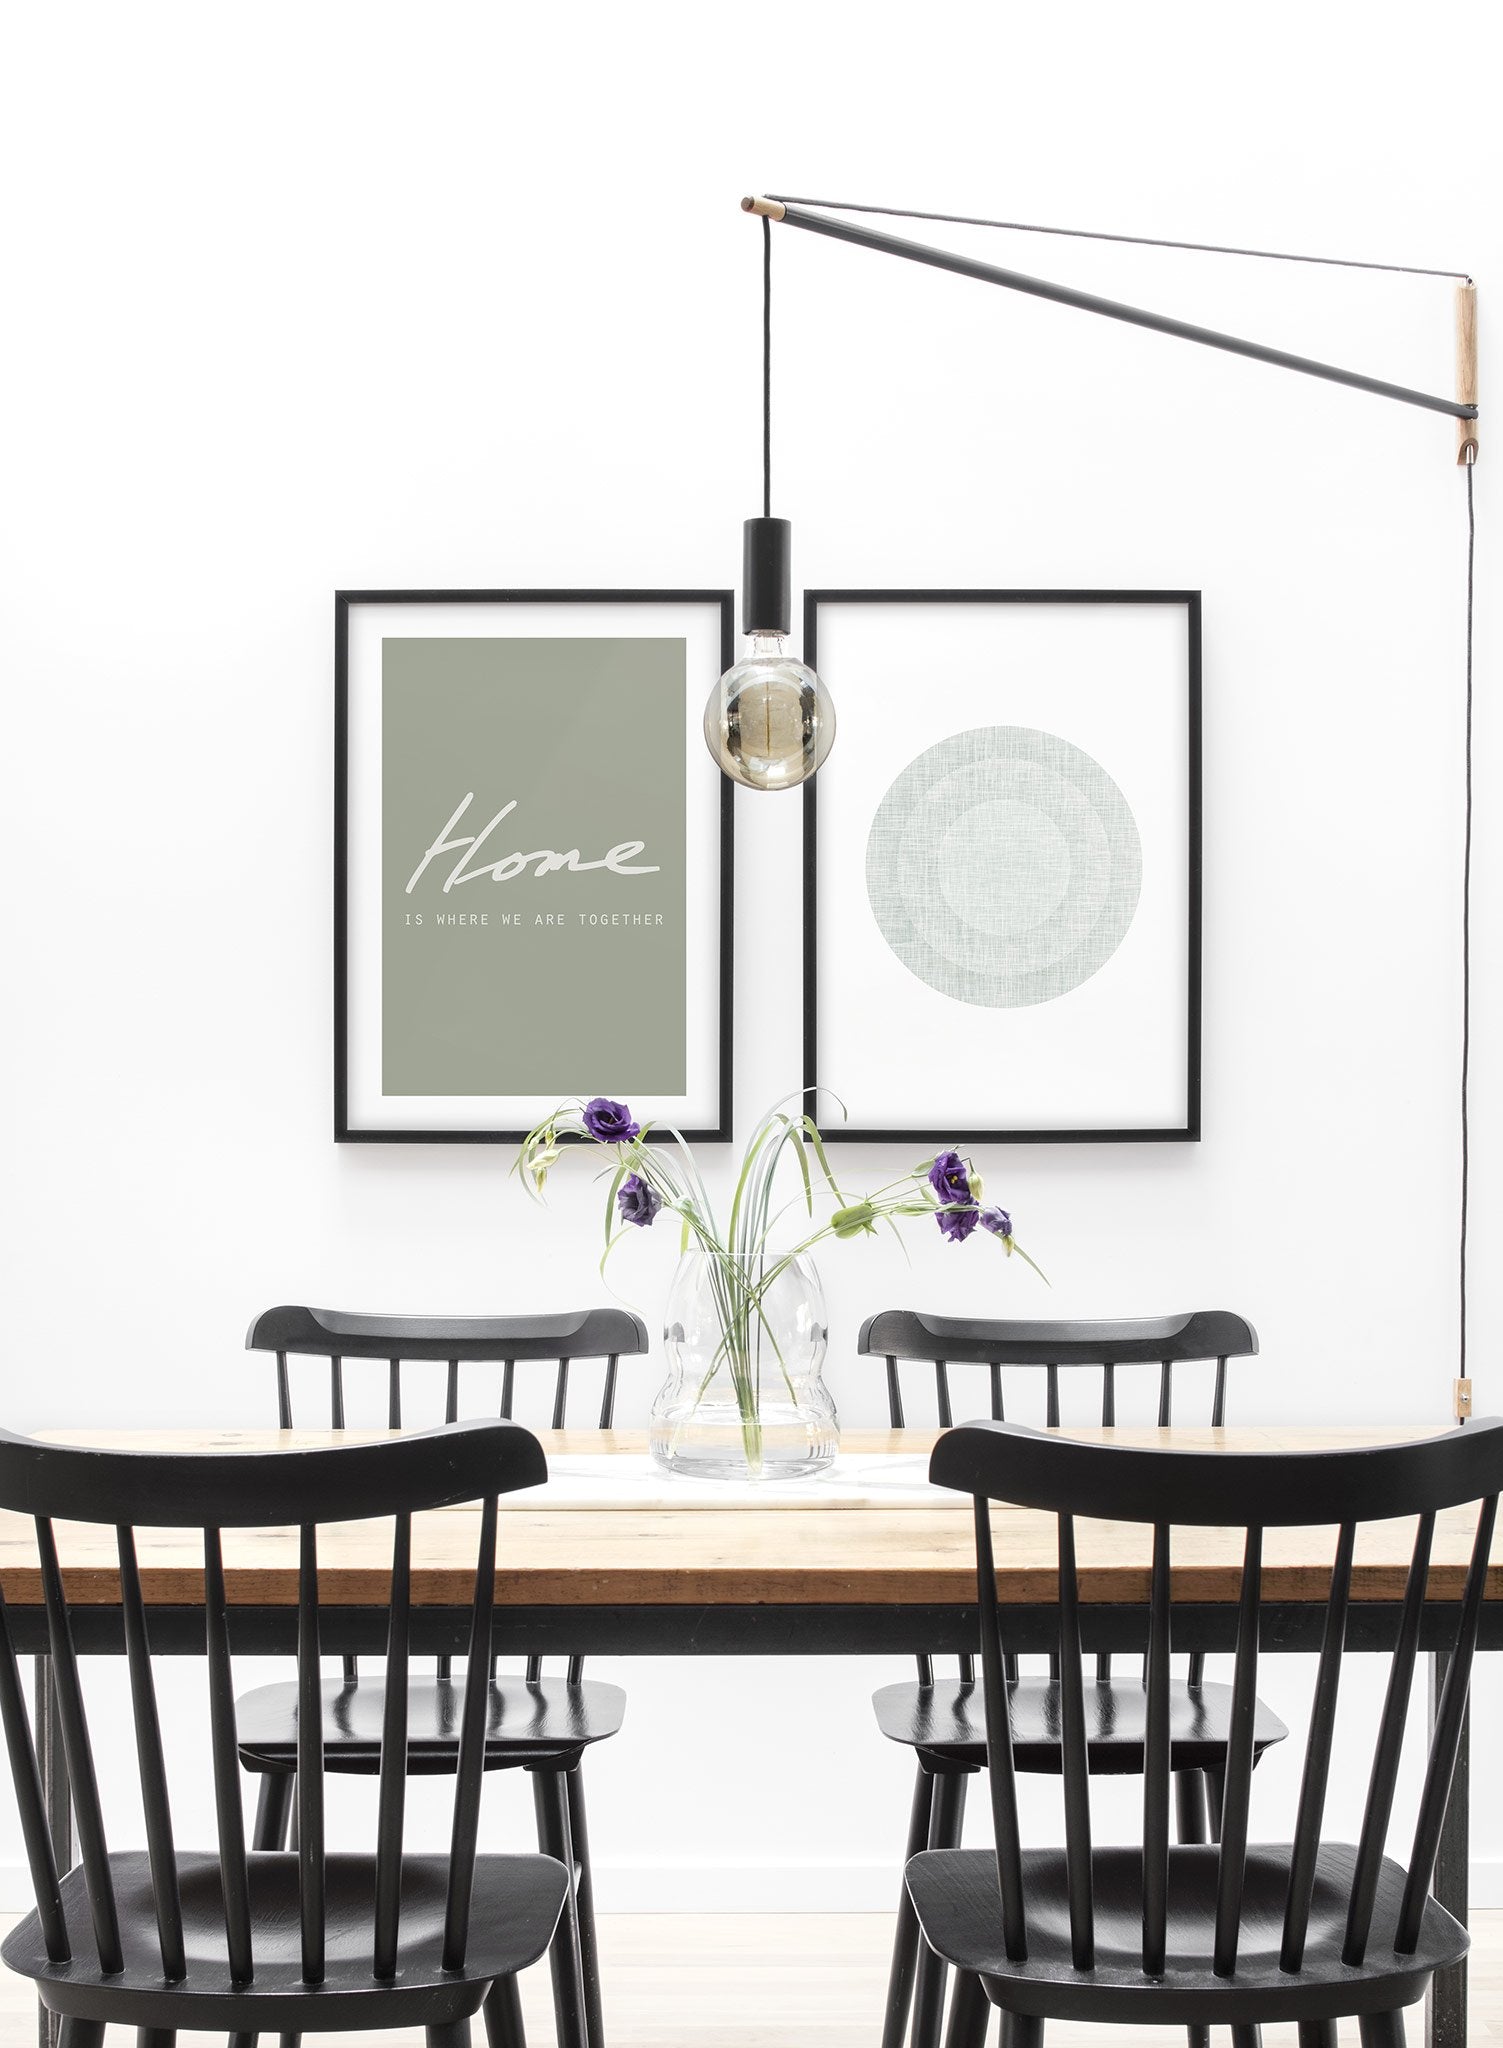 Scandinavian poster with black and white graphic typography design of home is where we are together in green by Opposite Wall - Lifestyle Duo - Dining Room